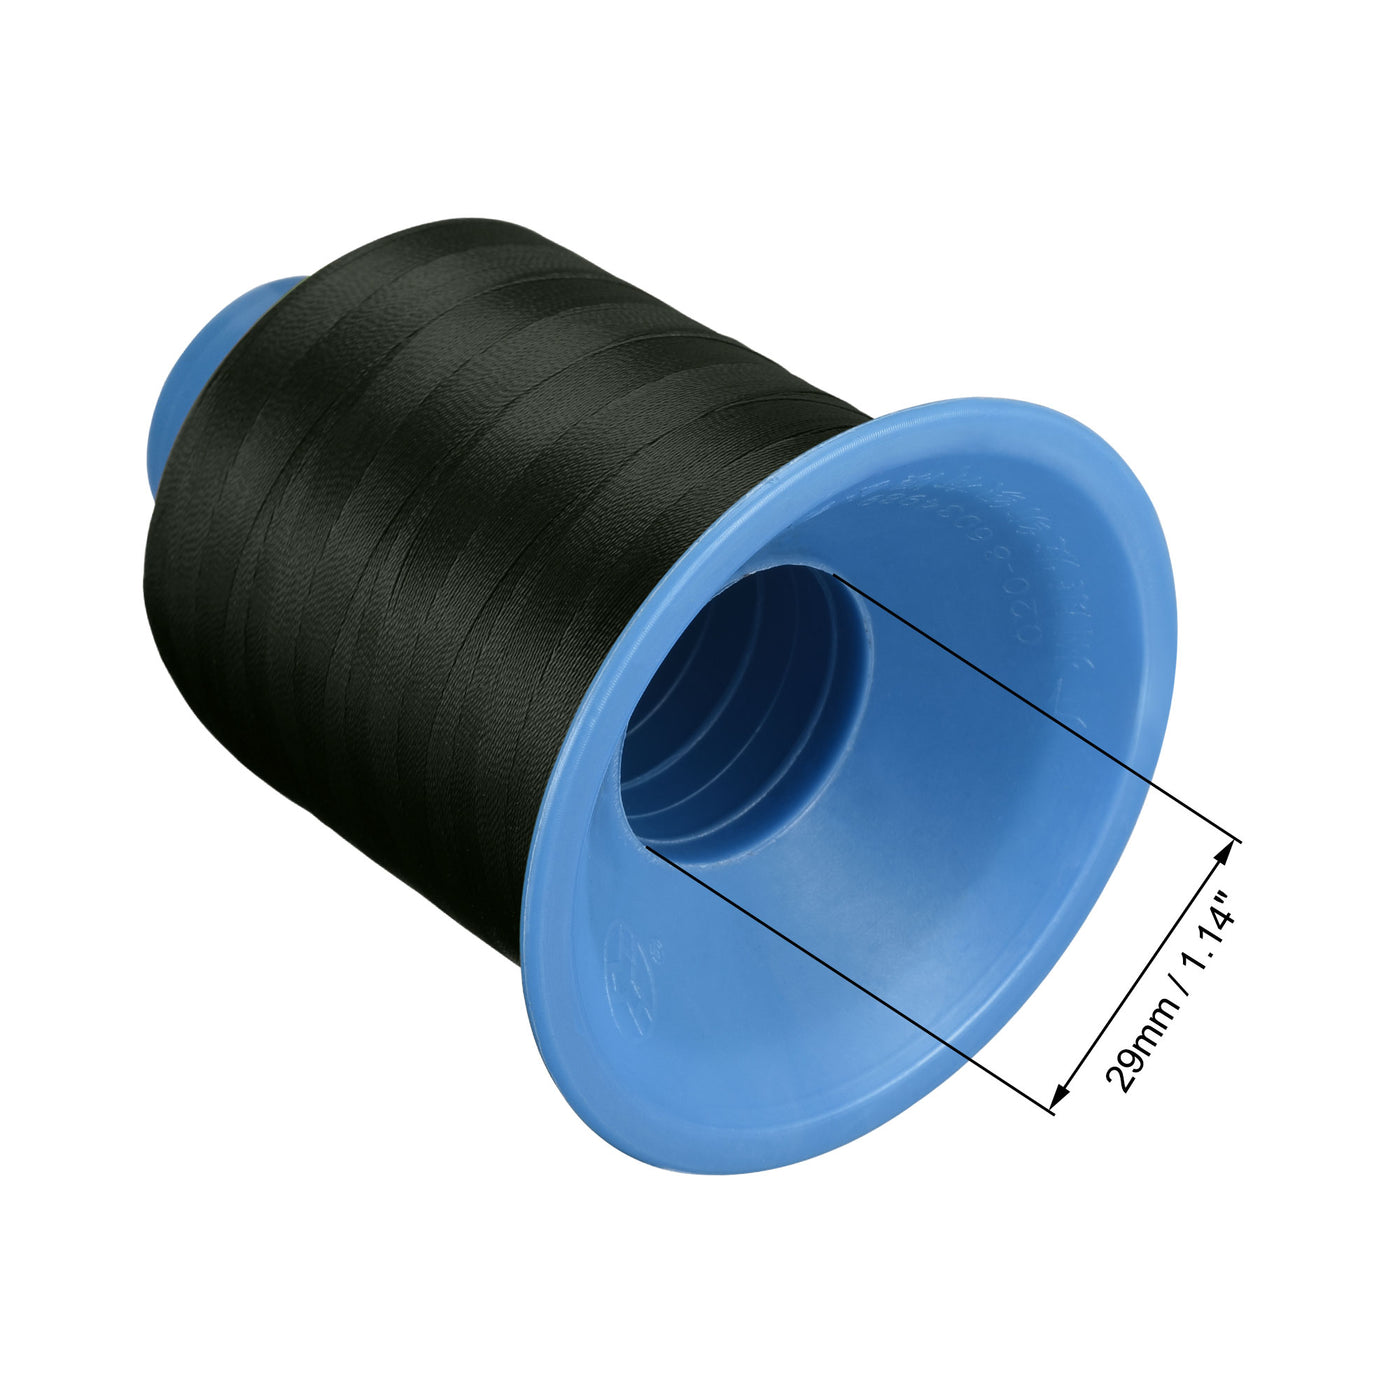 Uxcell Uxcell Bonded Polyester Thread Extra-strong 1968 Yards 150D/0.25mm (Dark Black)